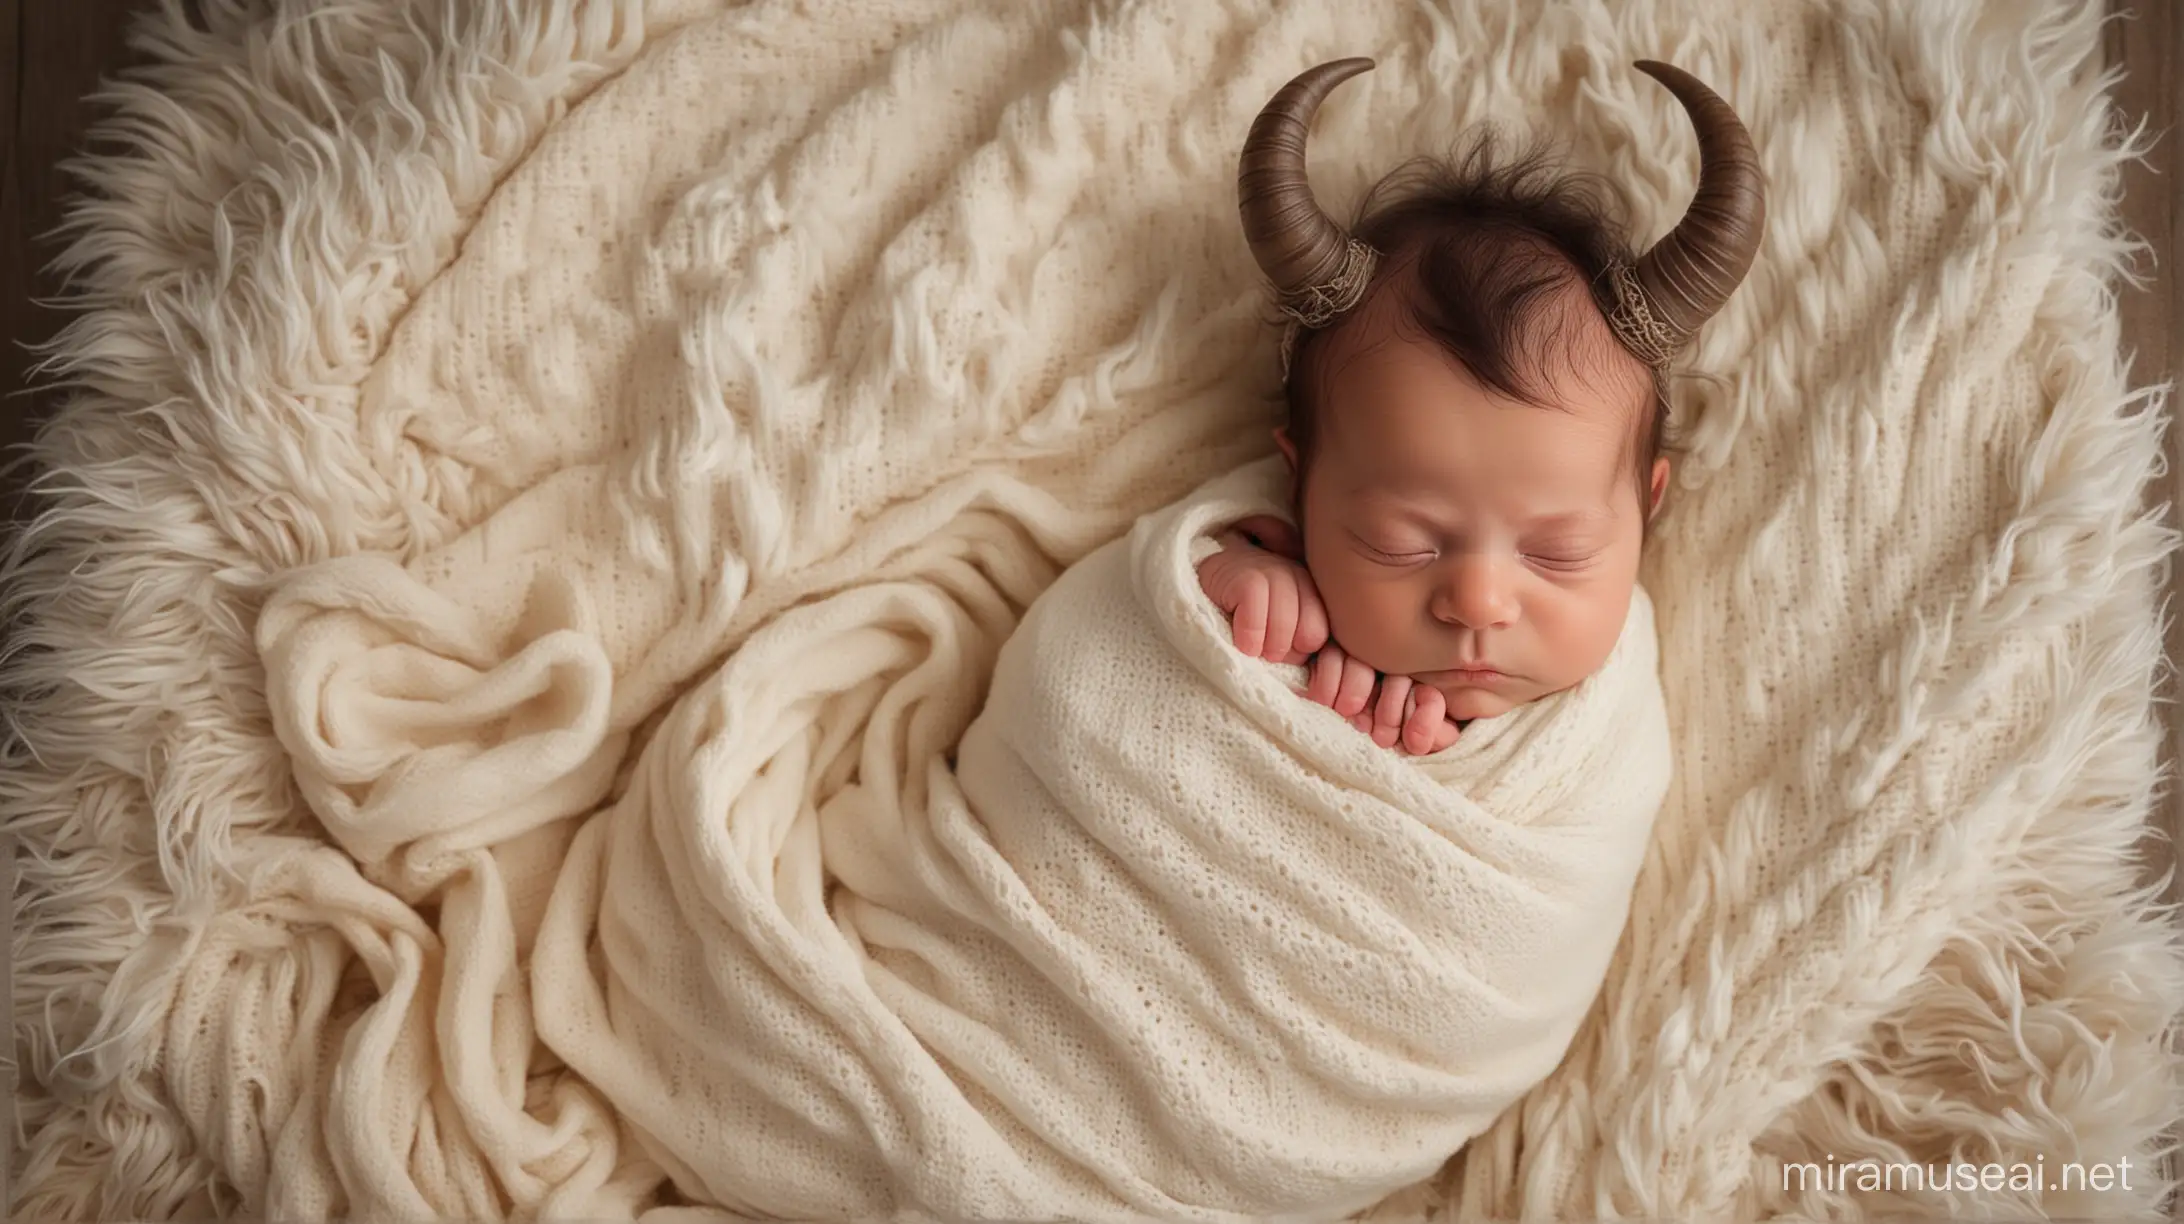 An enchanting image of a newborn baby, with a delicate touch of fantasy, born with a soft and gentle pair of horns protruding from their head. The baby lies peacefully, wrapped in a soft, warm blanket, surrounded by concerned, yet supportive, parents who are gentle and loving. The atmosphere is one of acceptance and warmth, radiating a message of love and kindness towards those who are different., photo